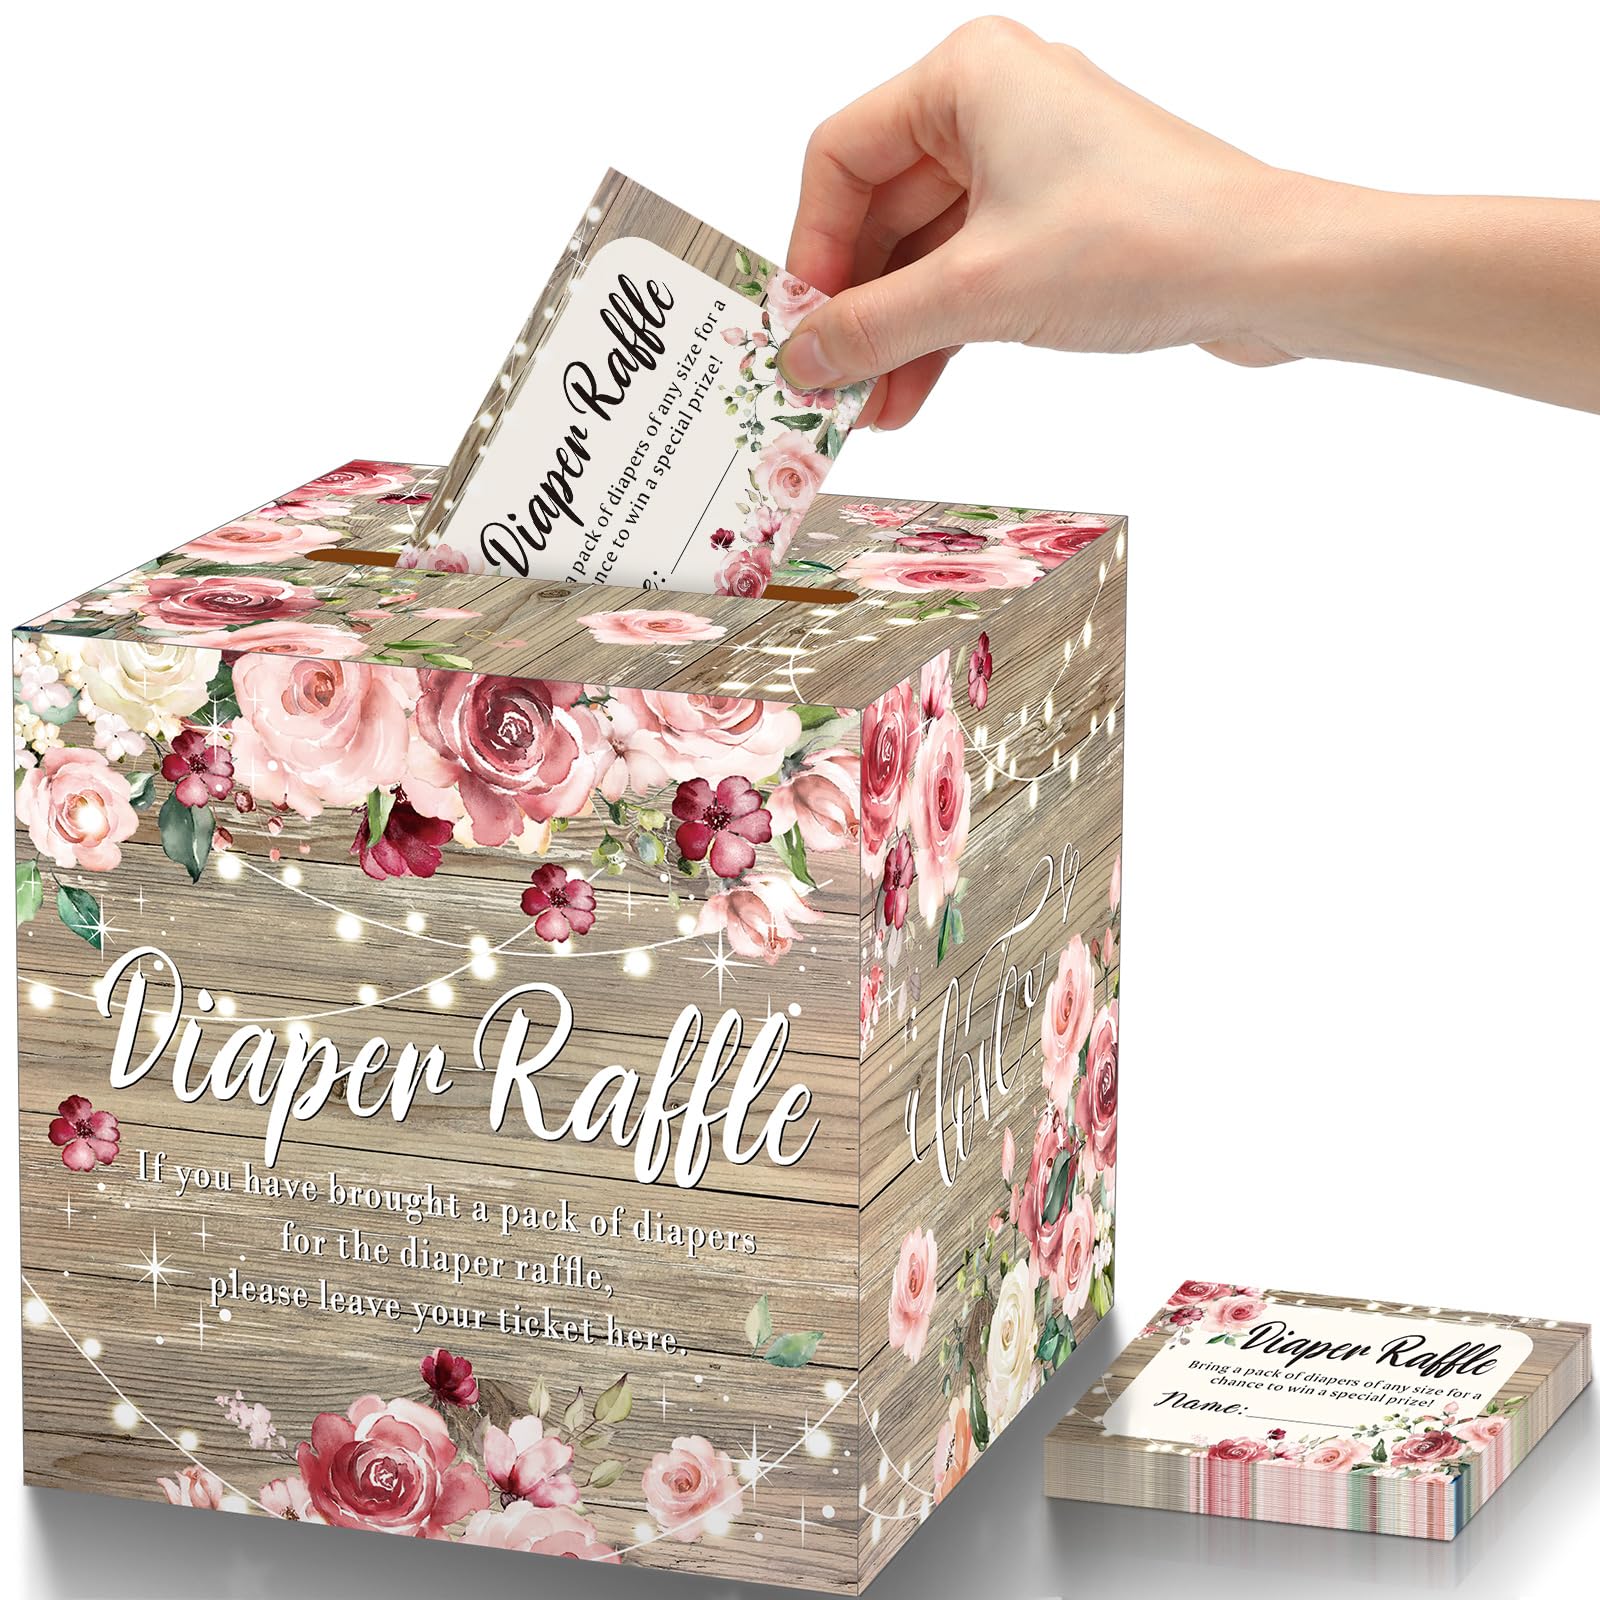 50 Pieces Floral Diaper Raffle Tickets for Baby Shower With Box Baby Shower Games Invitations Card Gender Reveal Diaper Raffle Sign Baby Shower Party Favor Decorations Bring A Pack of Diaper( Beige)